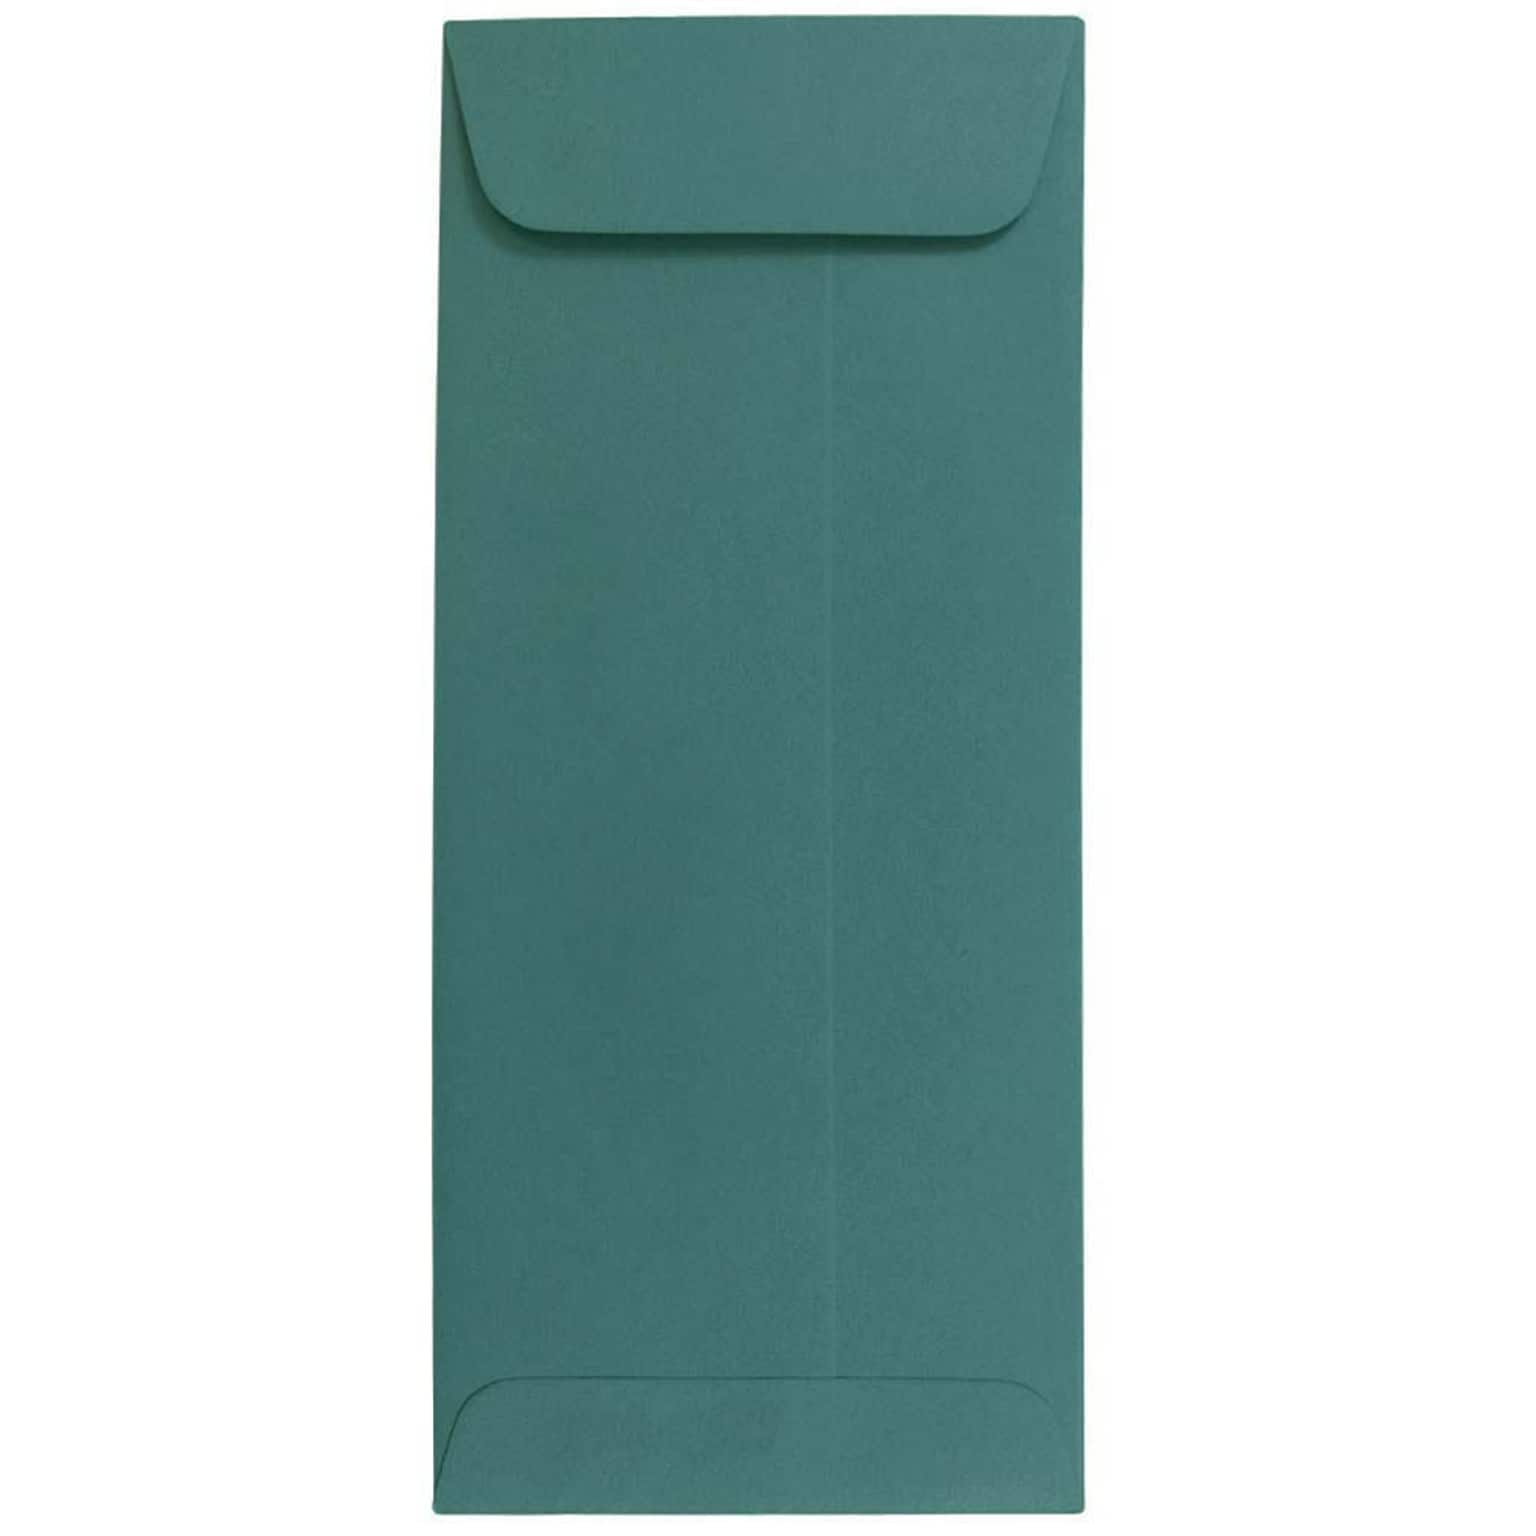 JAM Paper® #10 Policy Business Envelopes, 4.125 x 9.5, Teal, 25/Pack (21512995)